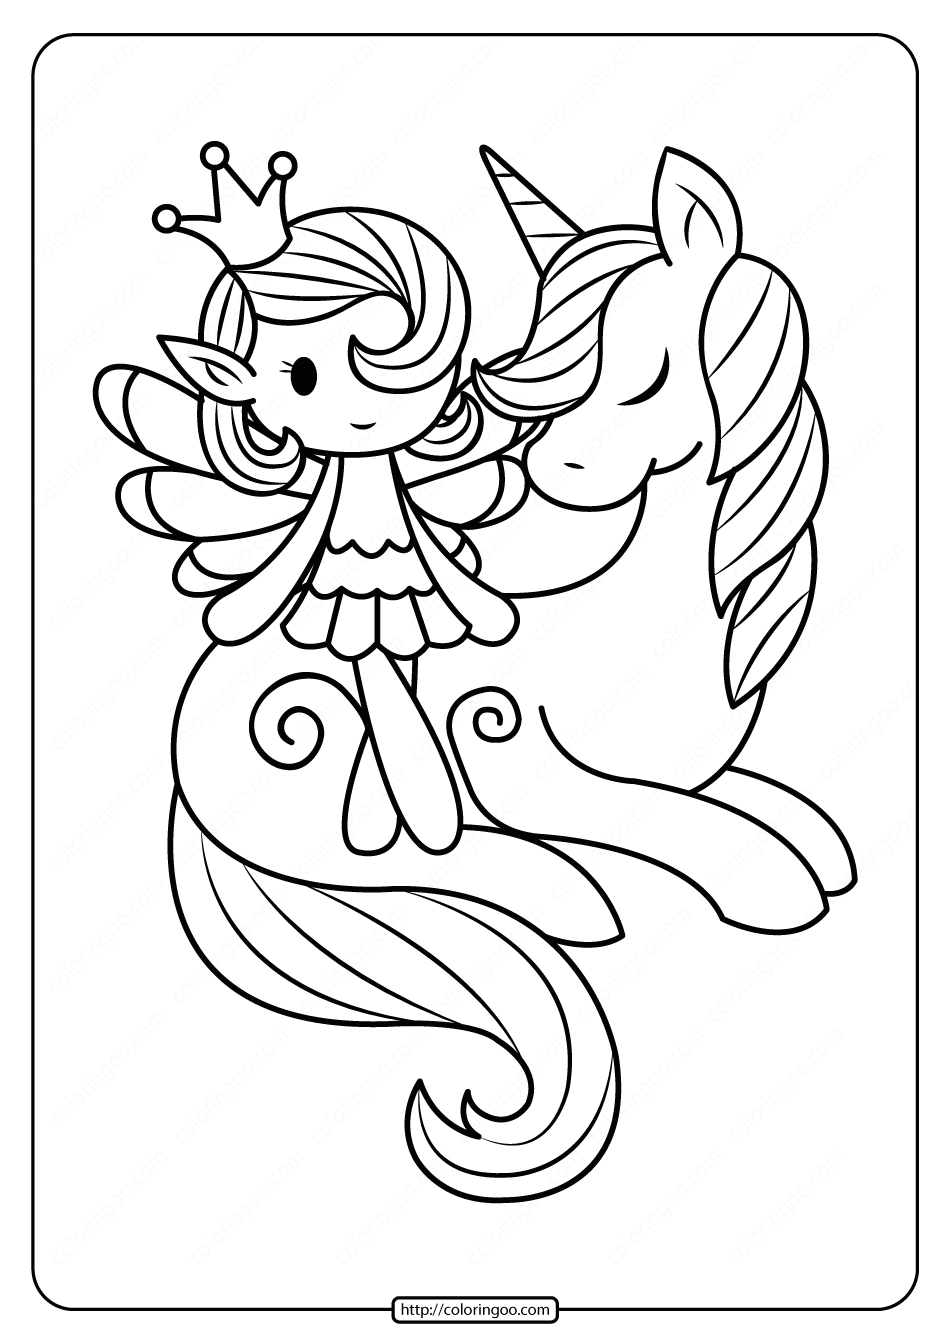 Printable Fairy And Unicorn Coloring Pages. High quality free printable pdf  coloring, drawing, pai… | Unicorn coloring pages, Fairy coloring pages,  Unicorn painting